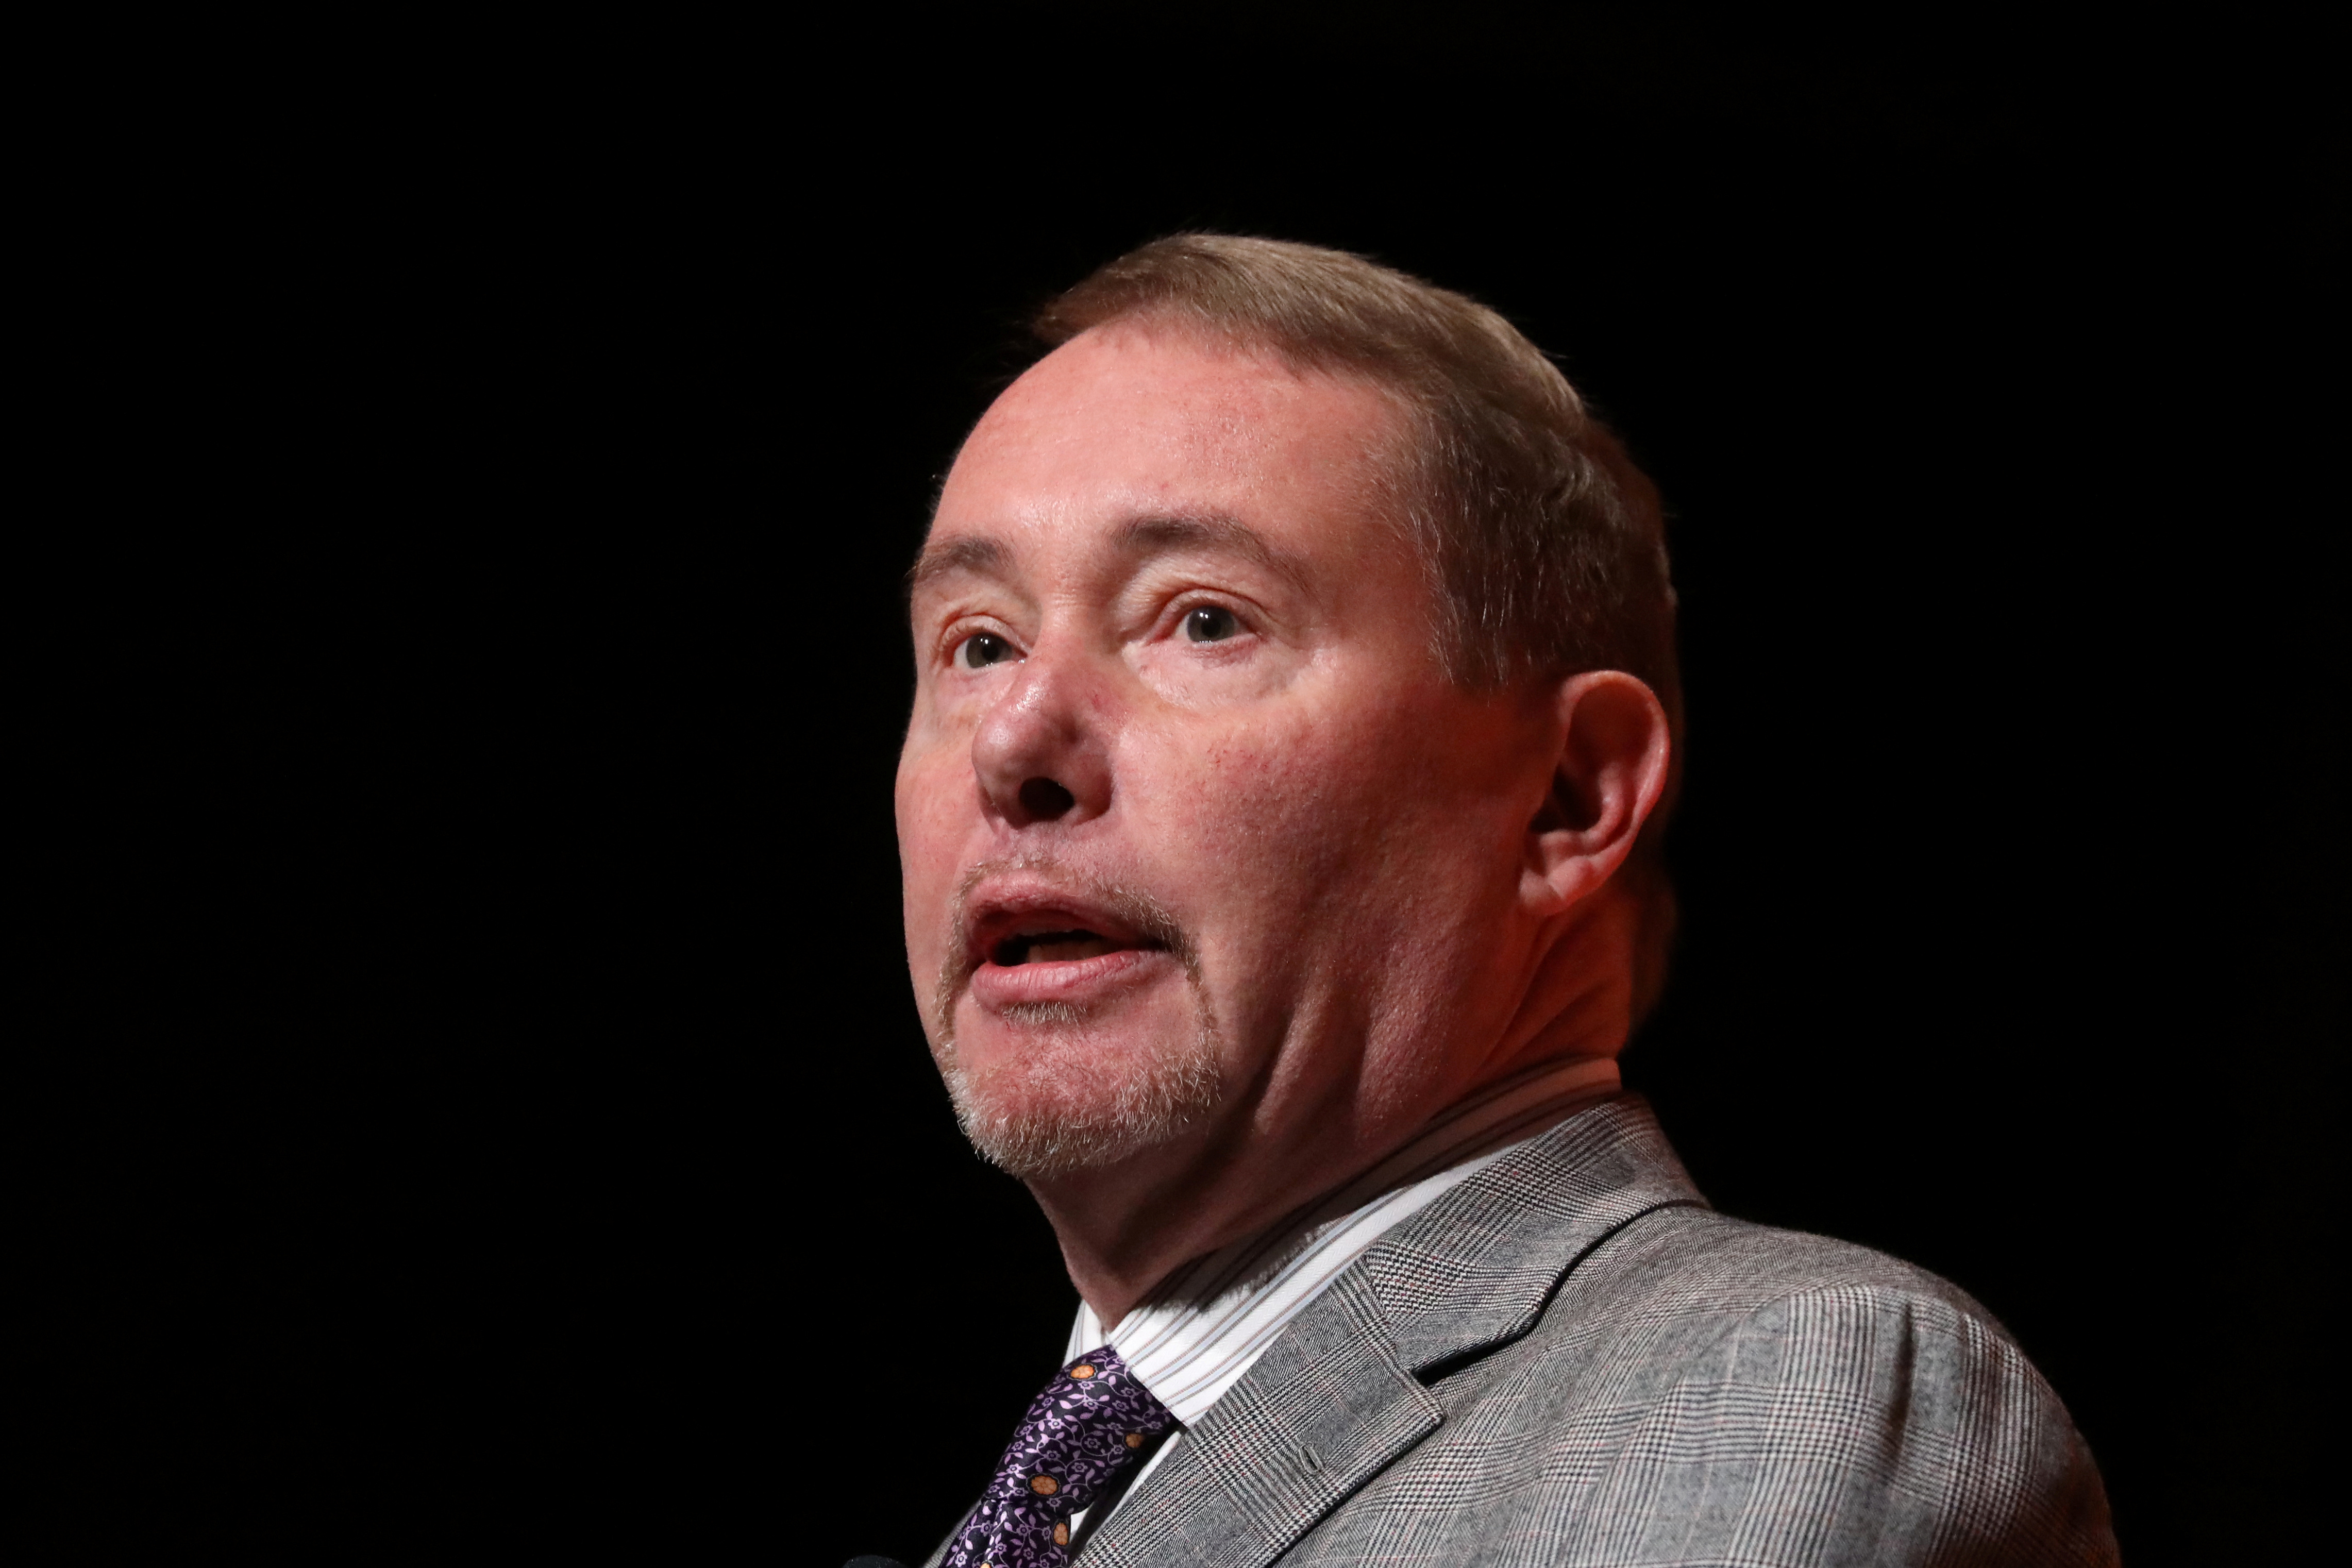 Jeffrey Gundlach,?CEO of DoubleLine Capital LP, presents during the 2019 Sohn Investment Conference in New York